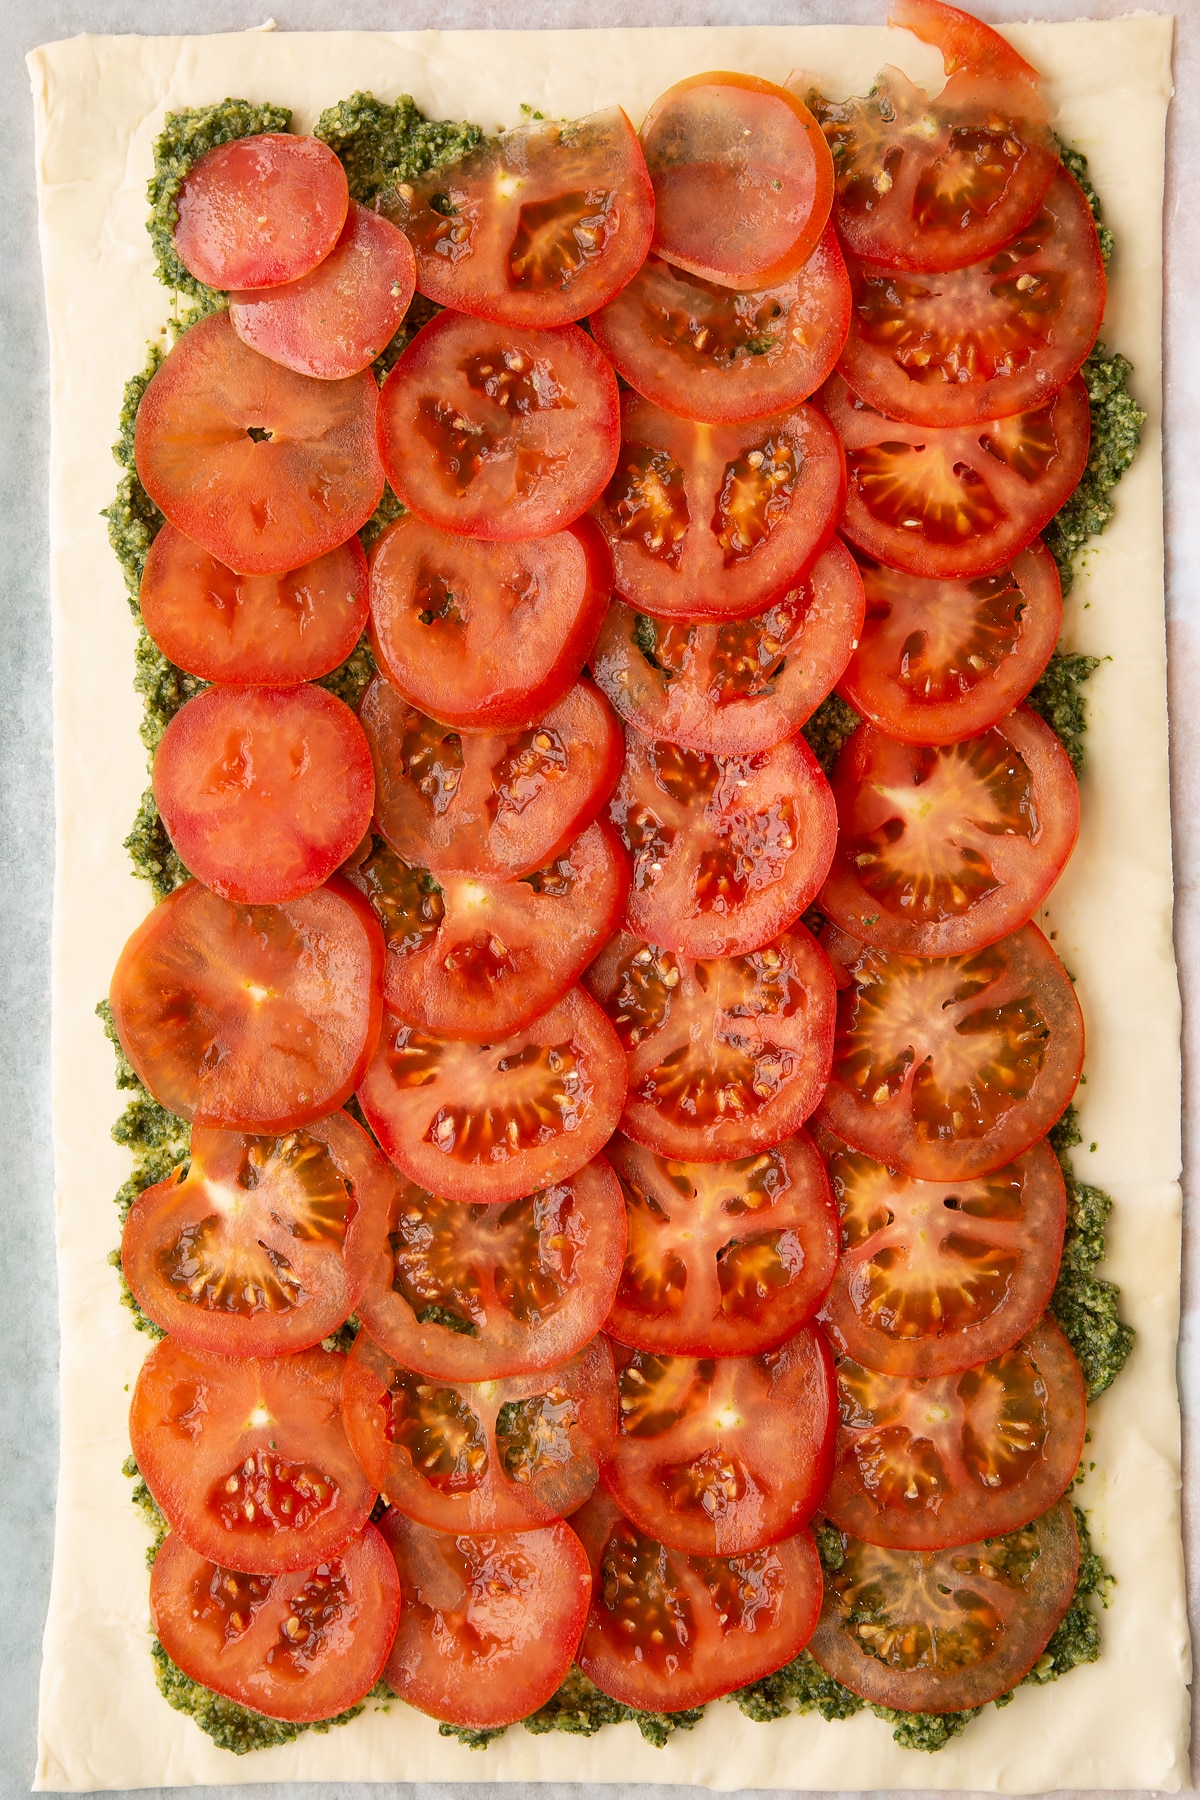 Adding sliced tomatos ontop of the puff pastry covered in pesto.